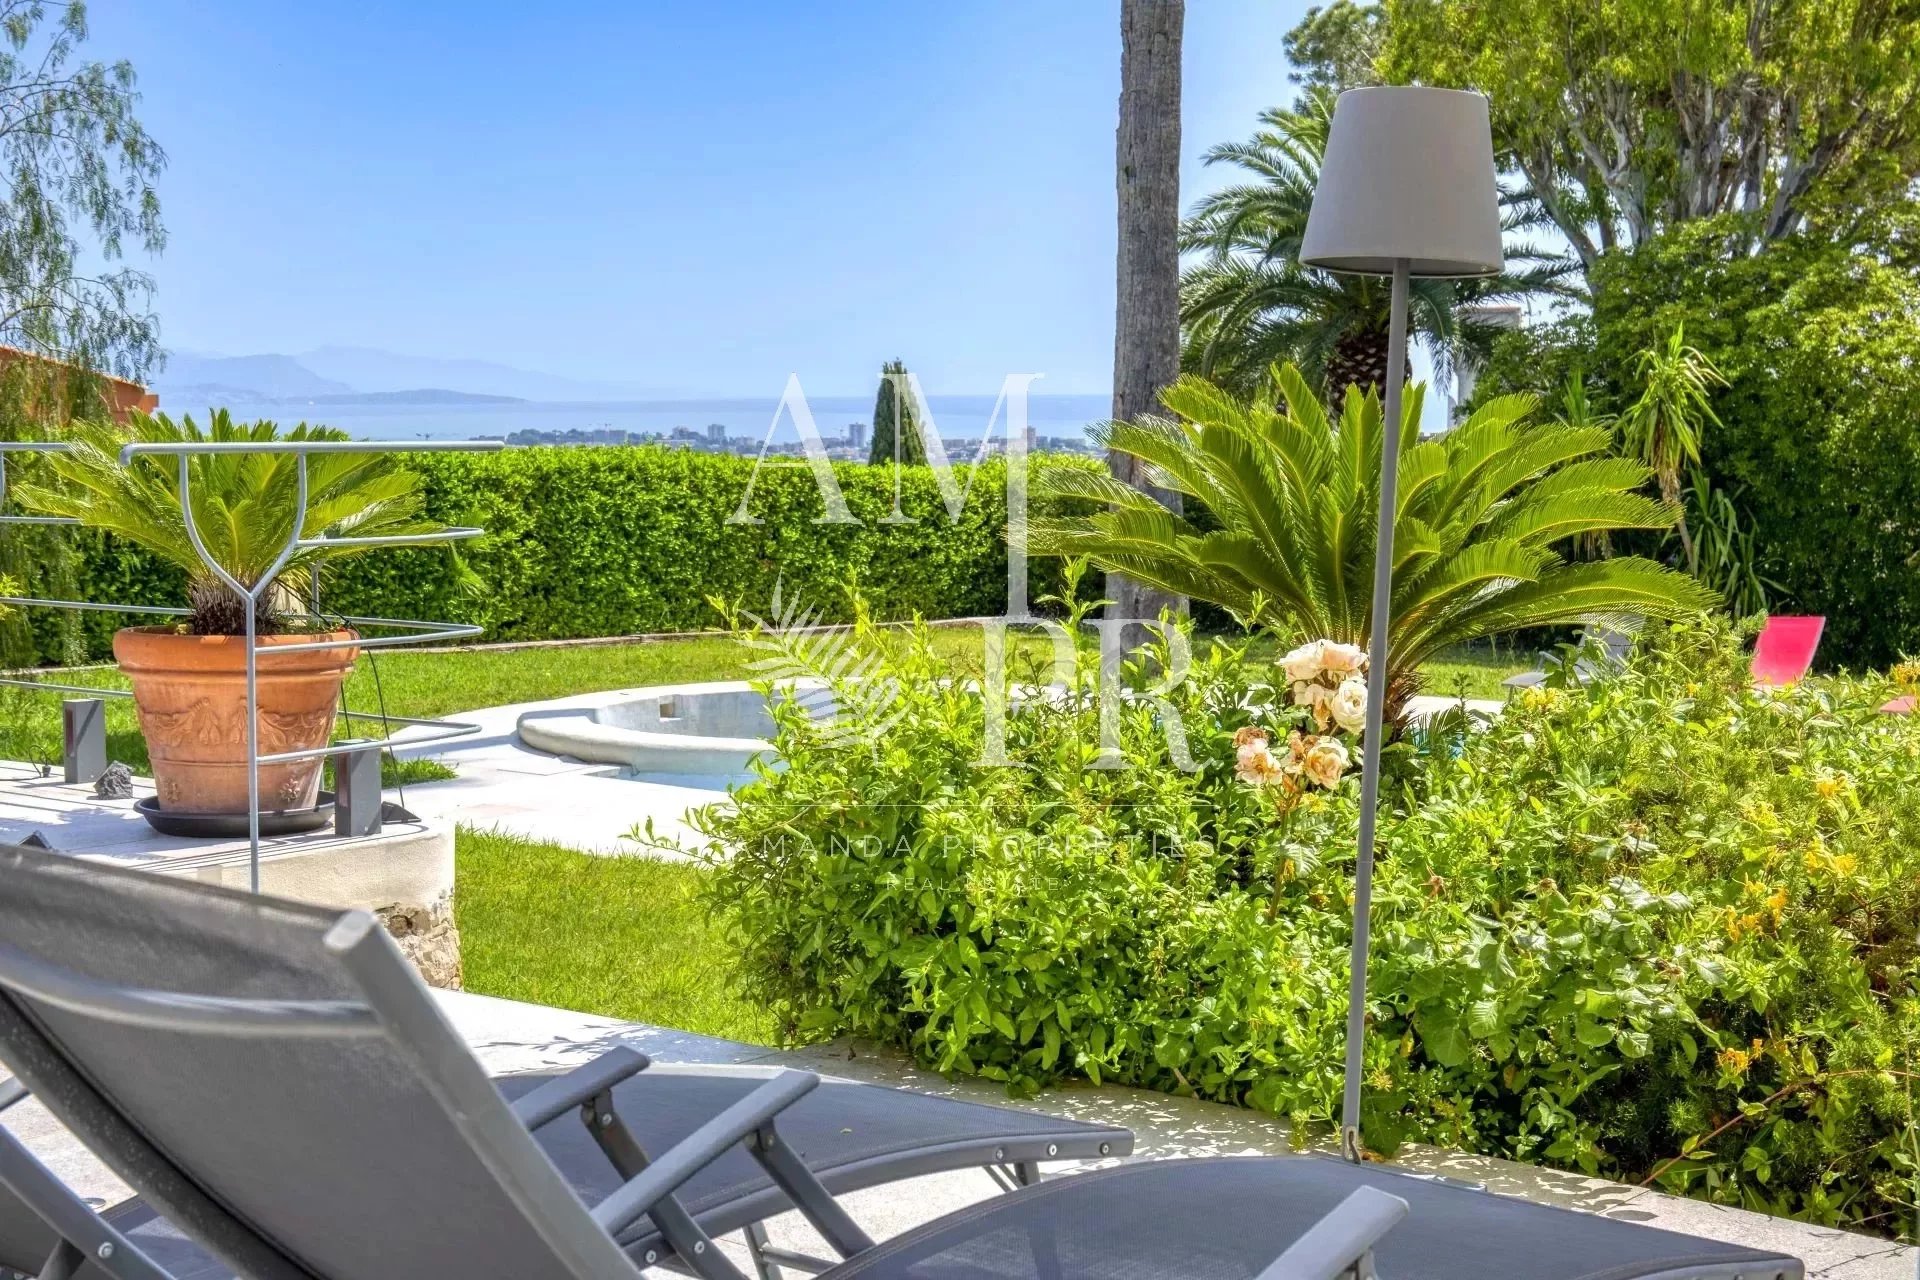 Super Cannes - 2 One level villas - Panoramic views over the sea & the hills